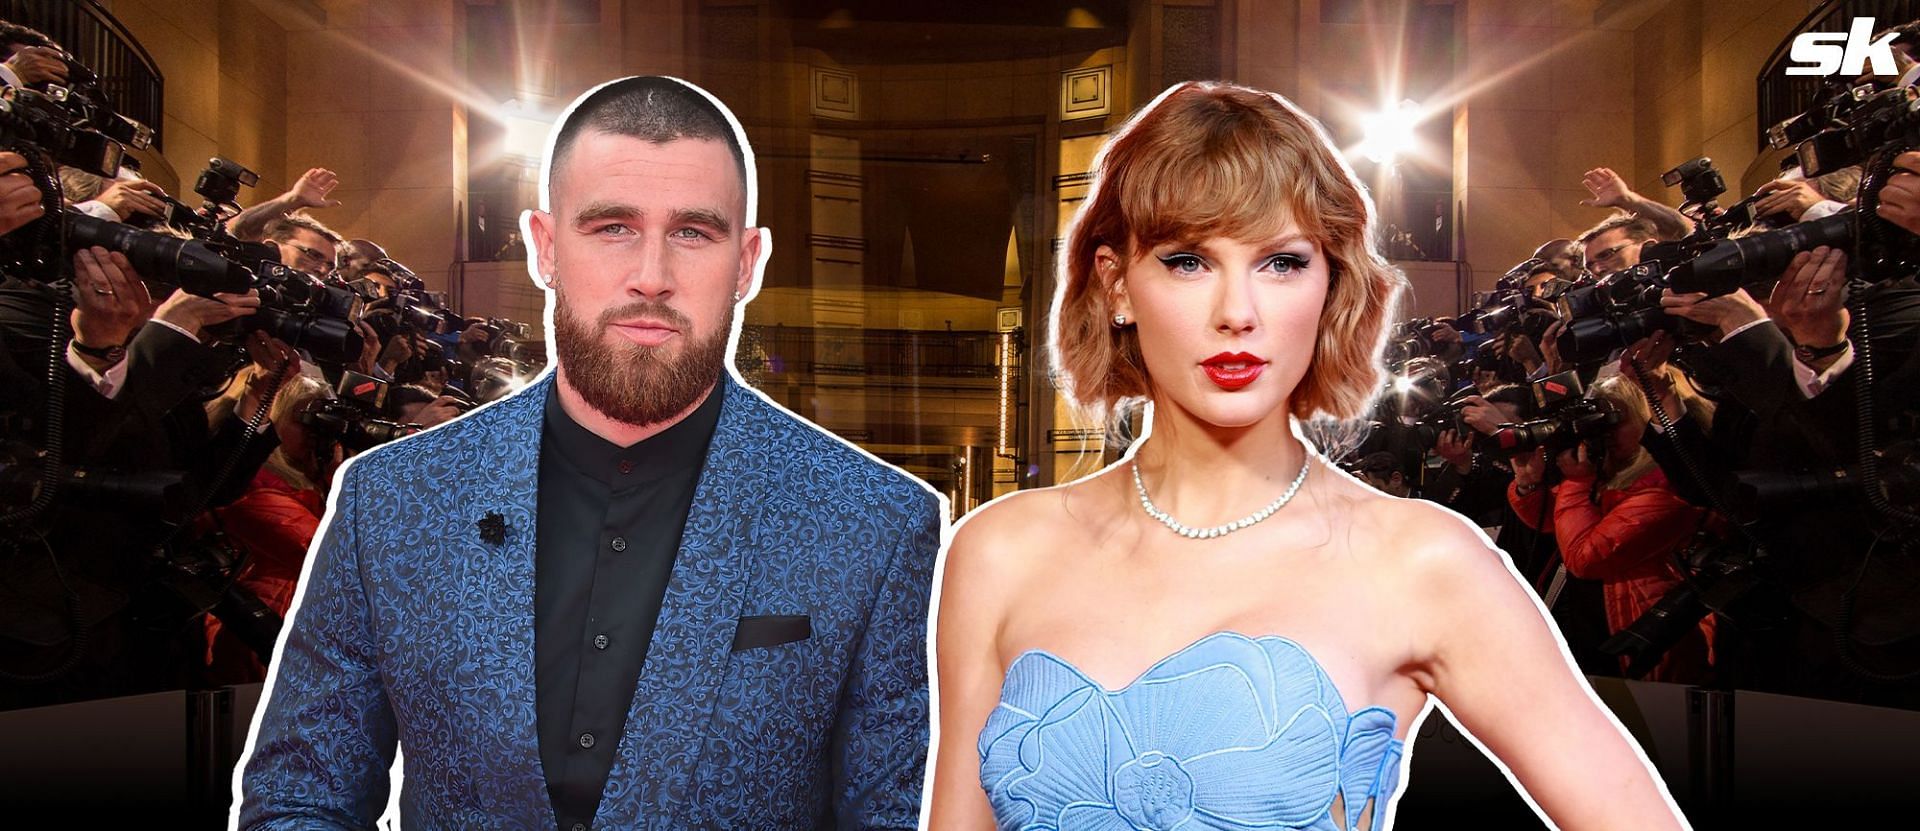 Travis Kelce and Taylor Swift were able to evade cameras whiule they attended an exclusive Oscars party.